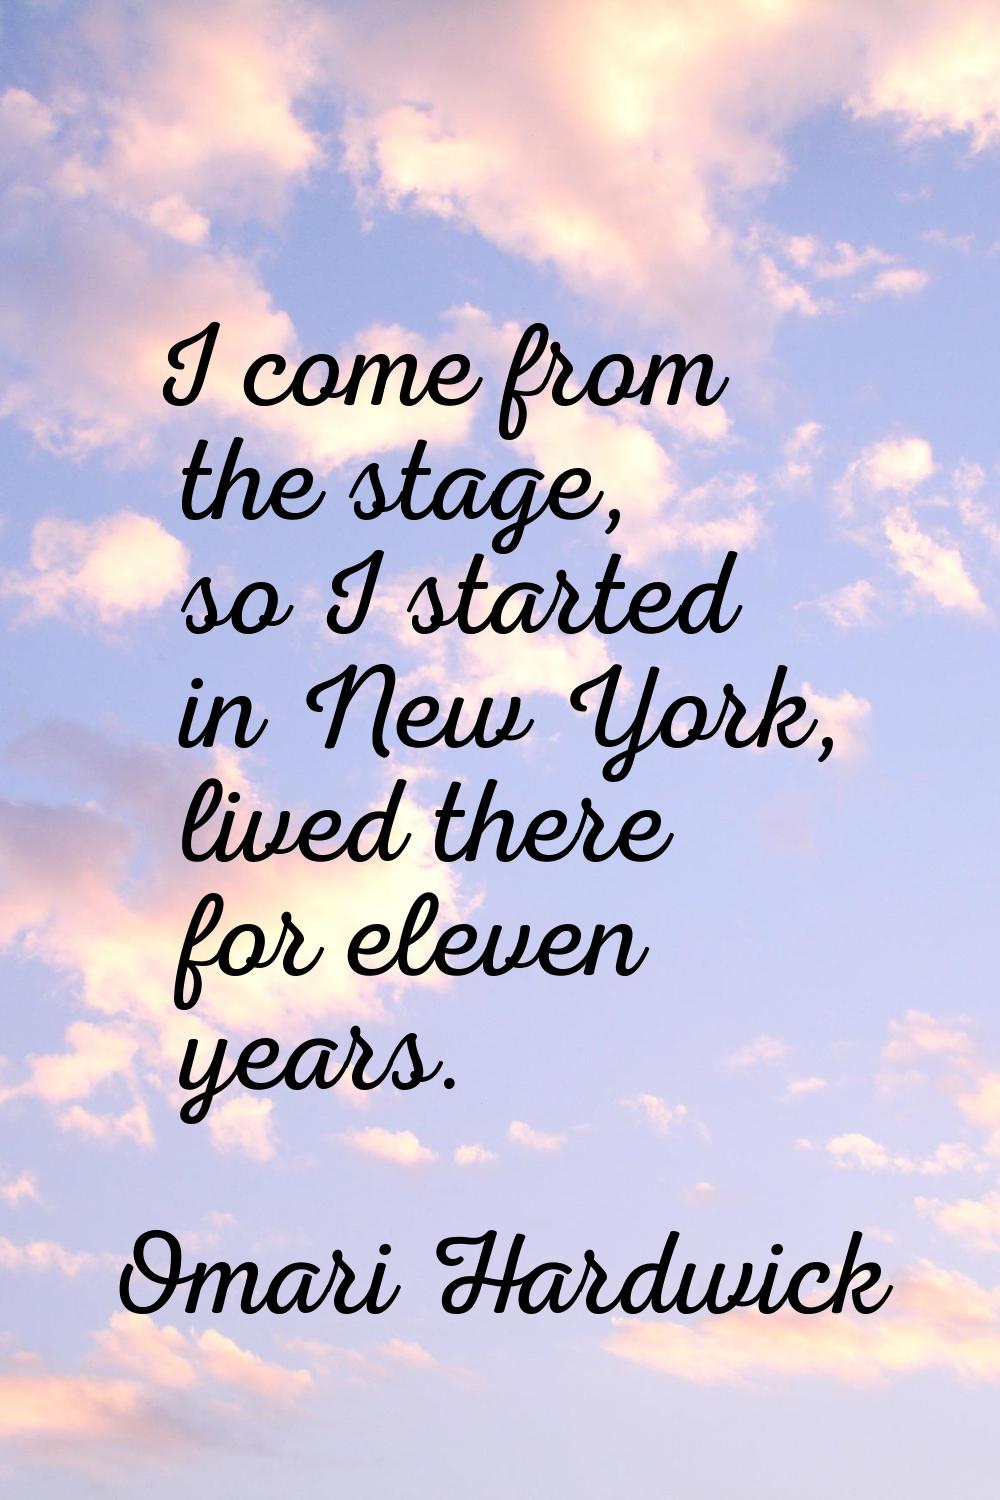 I come from the stage, so I started in New York, lived there for eleven years.